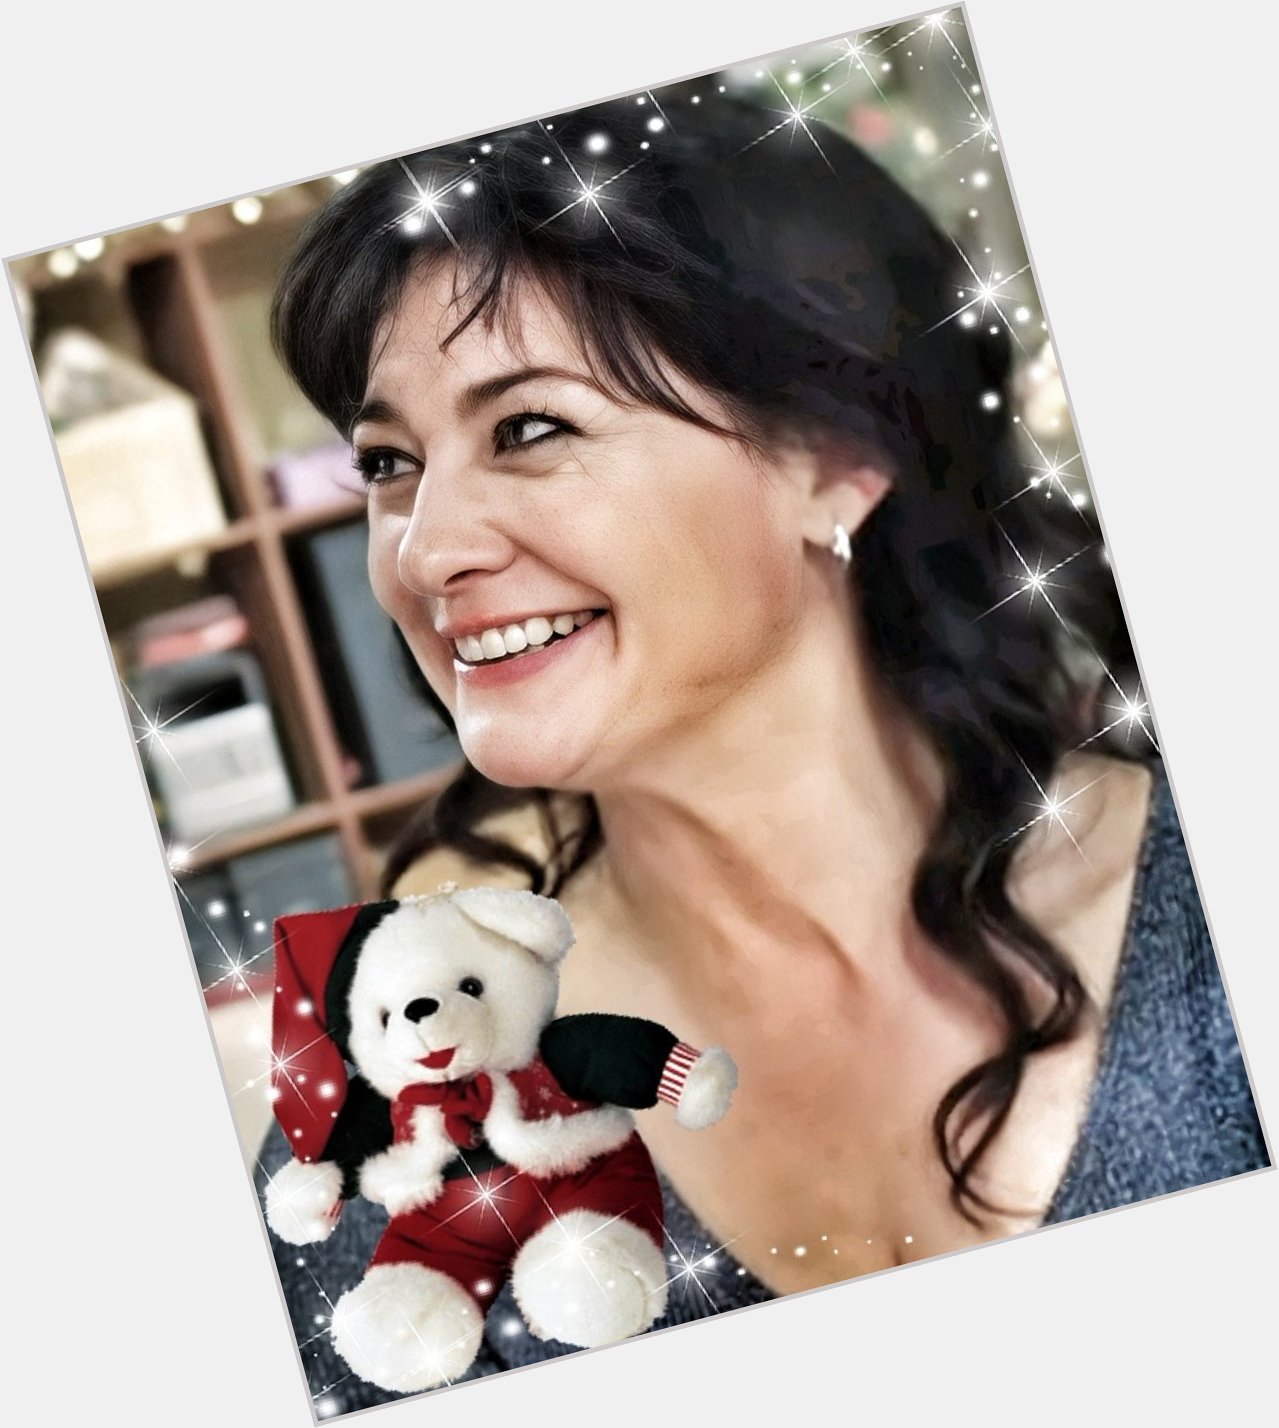 Good Morning messagelings.
Happy Birthday Natalie J. Robb. 48 today.  